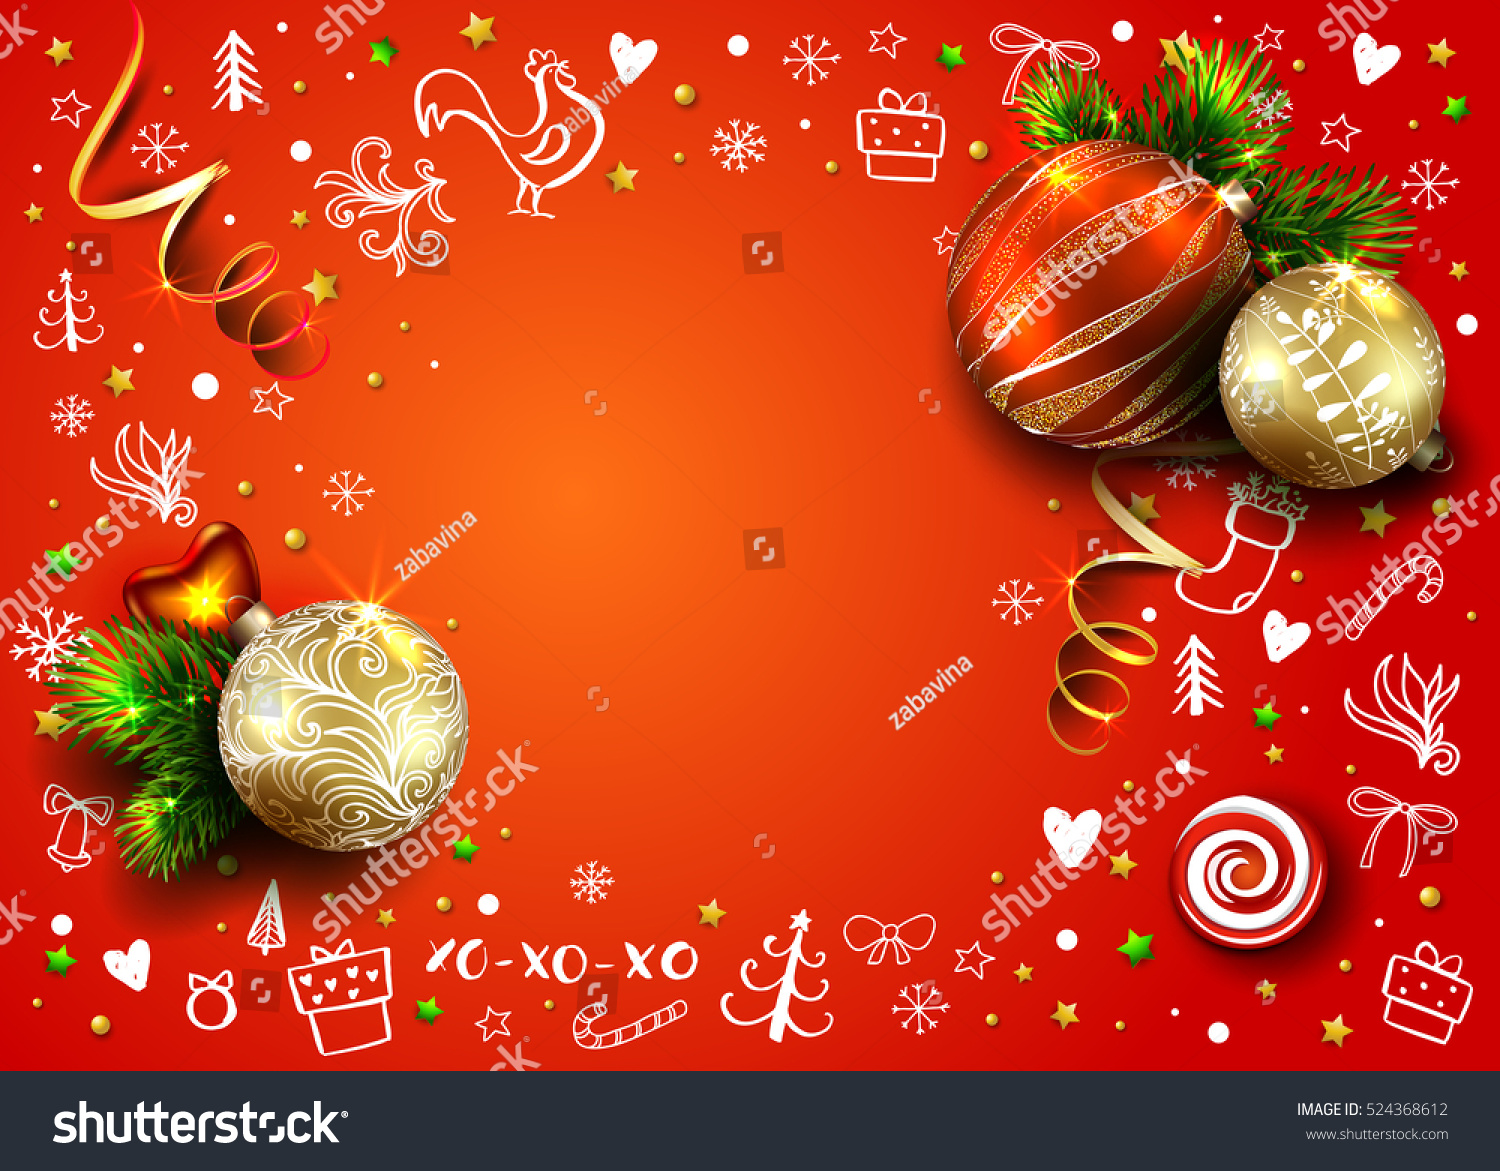 Christmas red vector card with realistic fir tree balls decorations and hand drawn elements